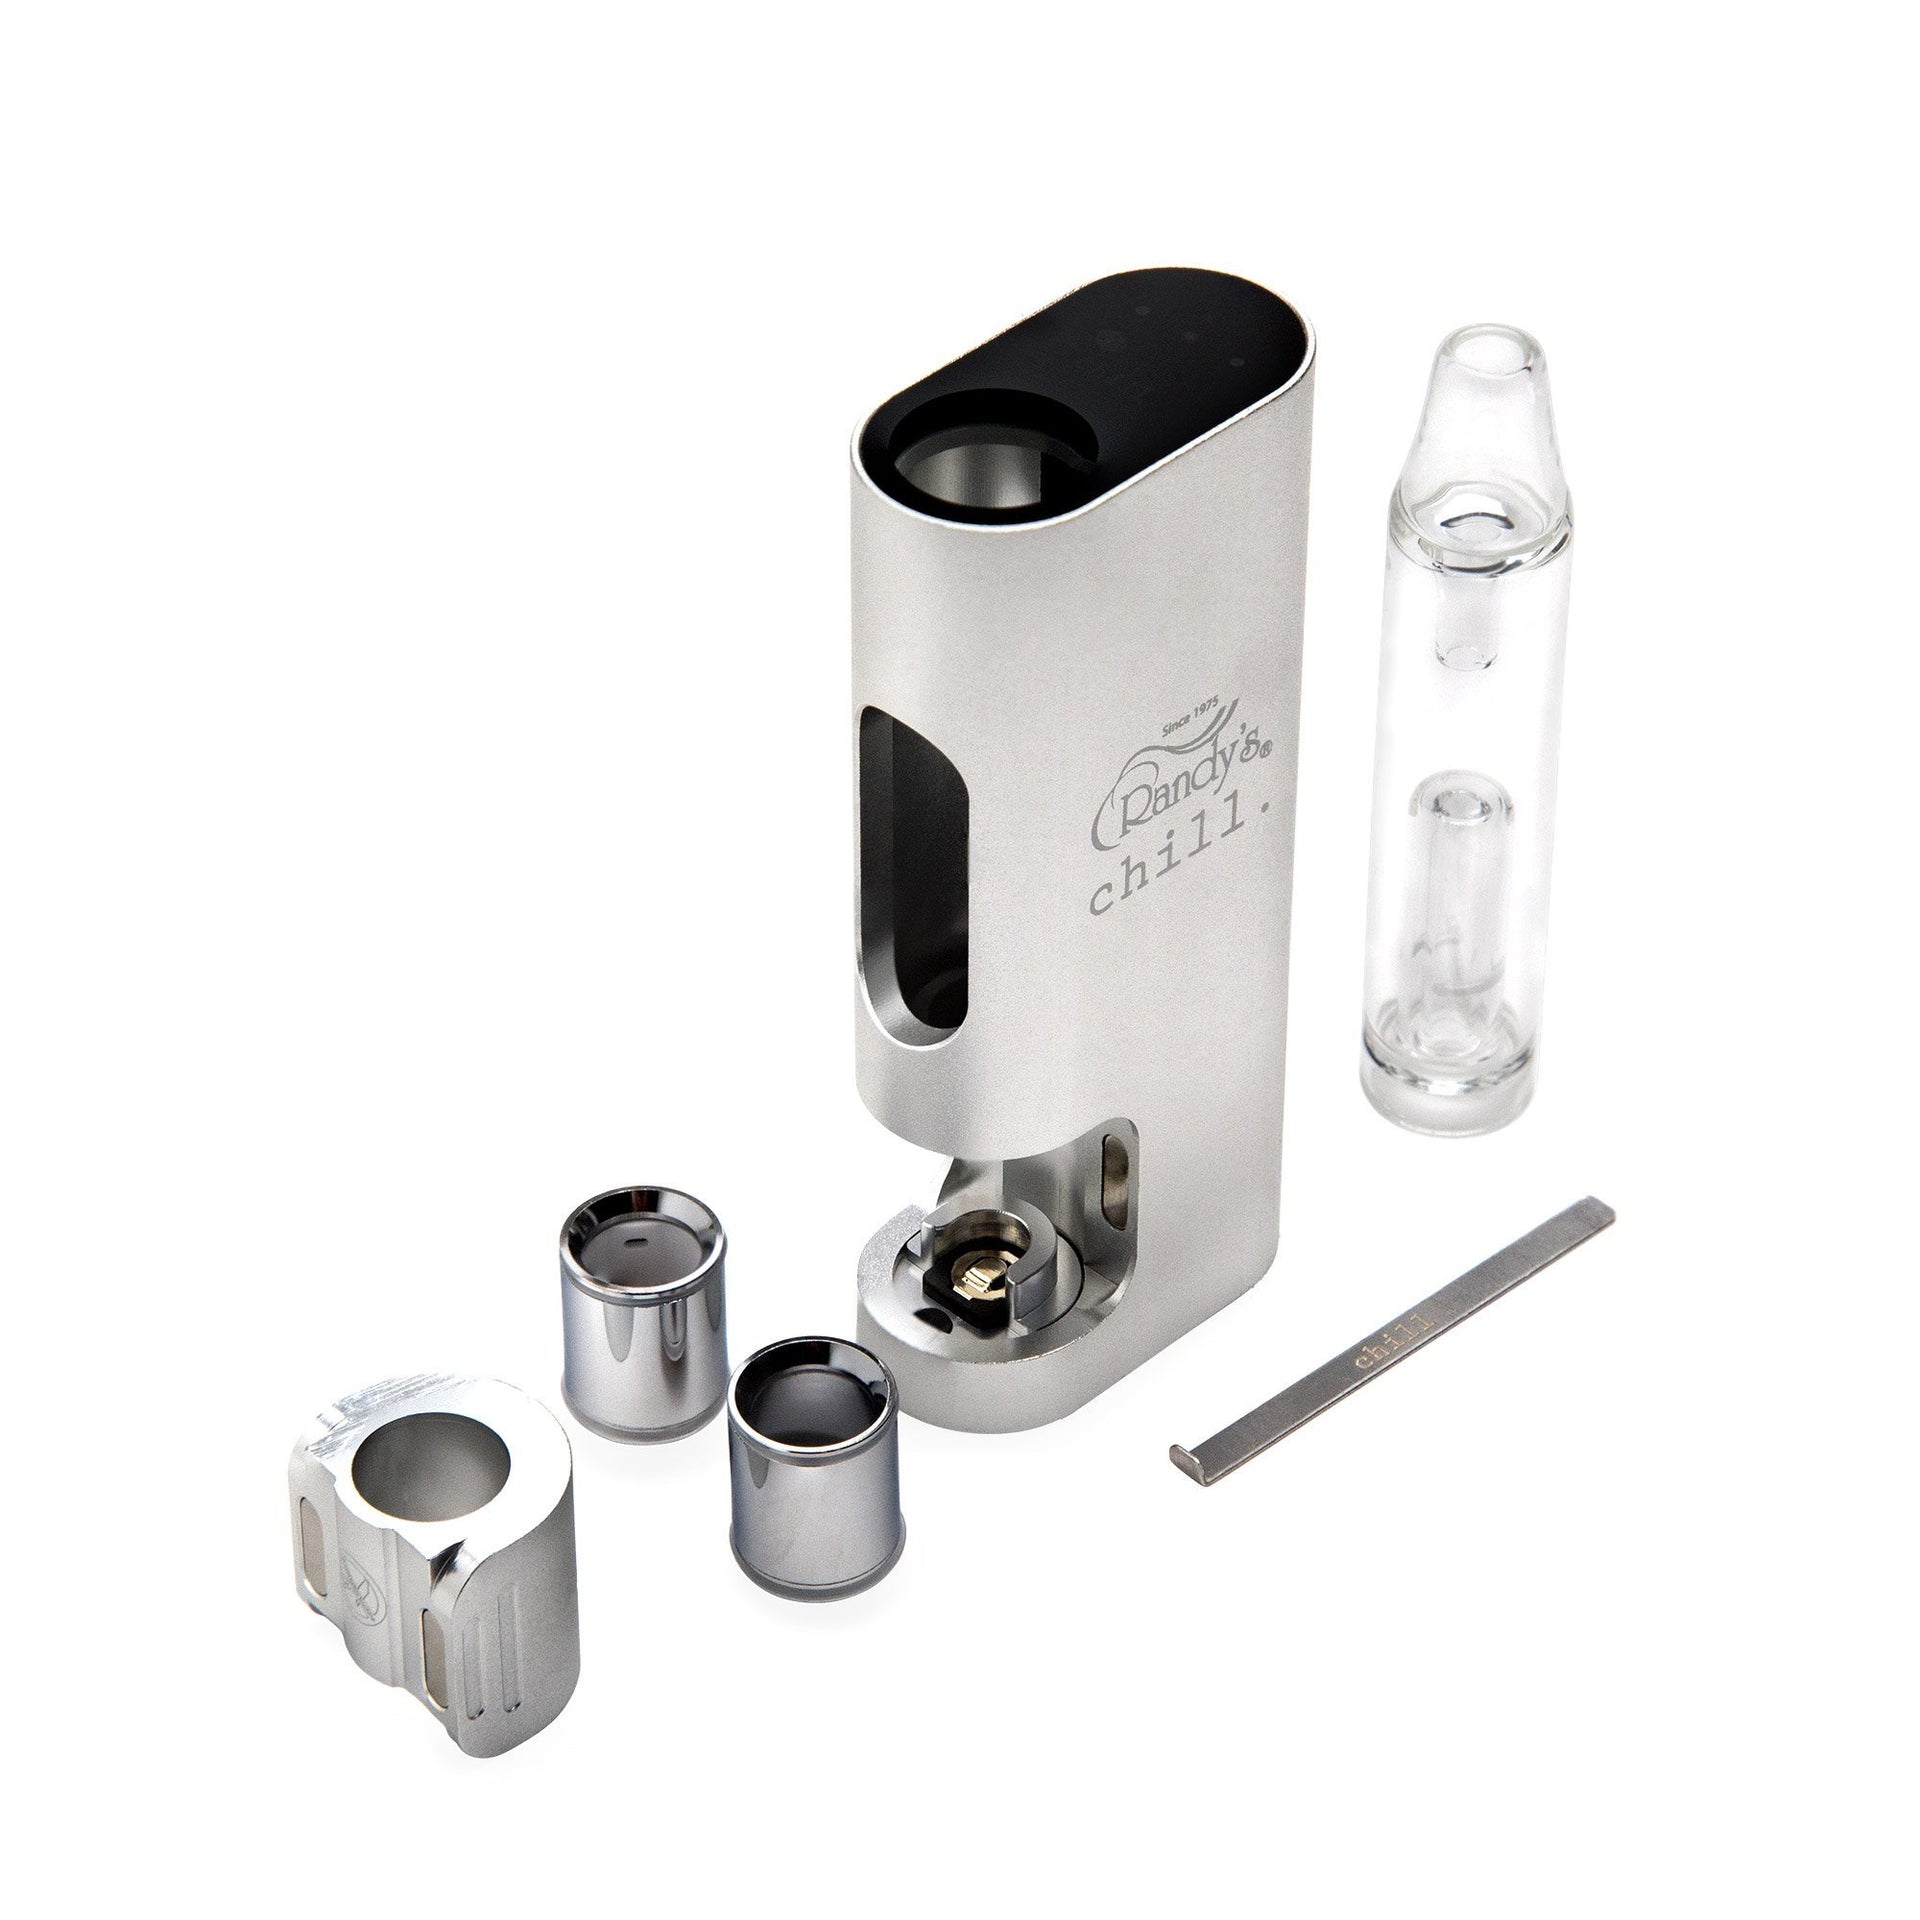 Randy's Chill Freezable Dual Use Vaporizer - 420 Science - The most trusted online smoke shop.